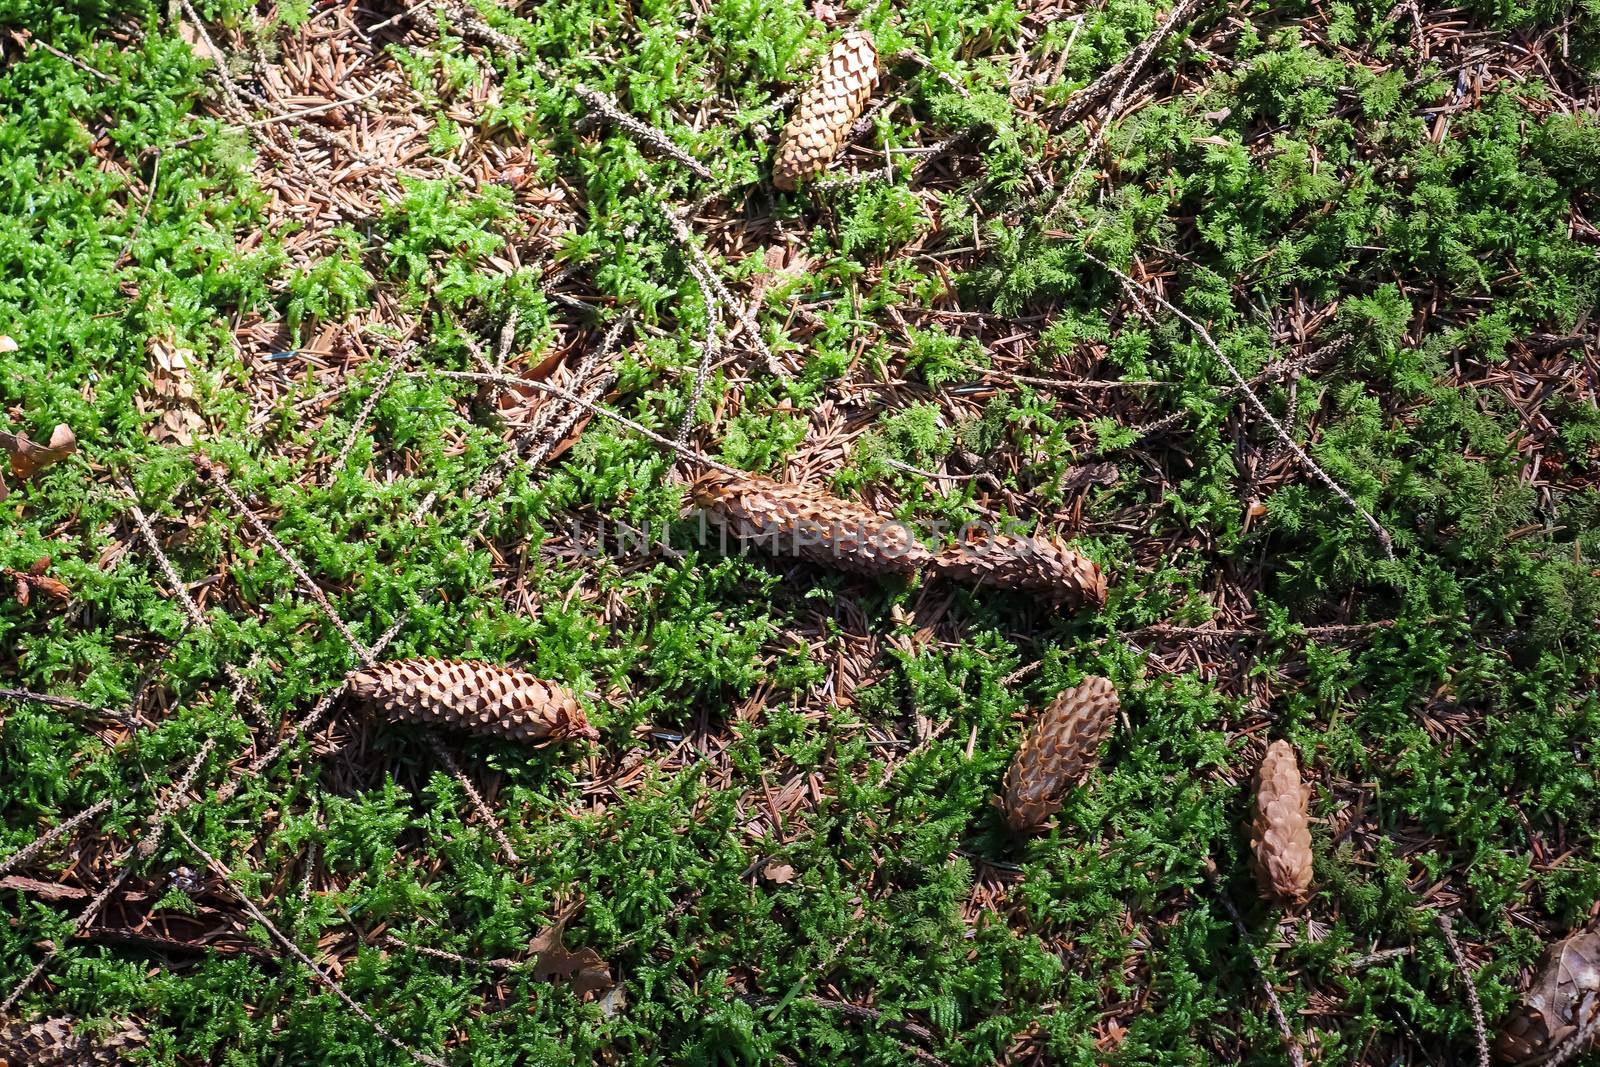 The ground in a forest with pine cones, moss, grass, pine needles, autumn leaves. Forest soil texture background.